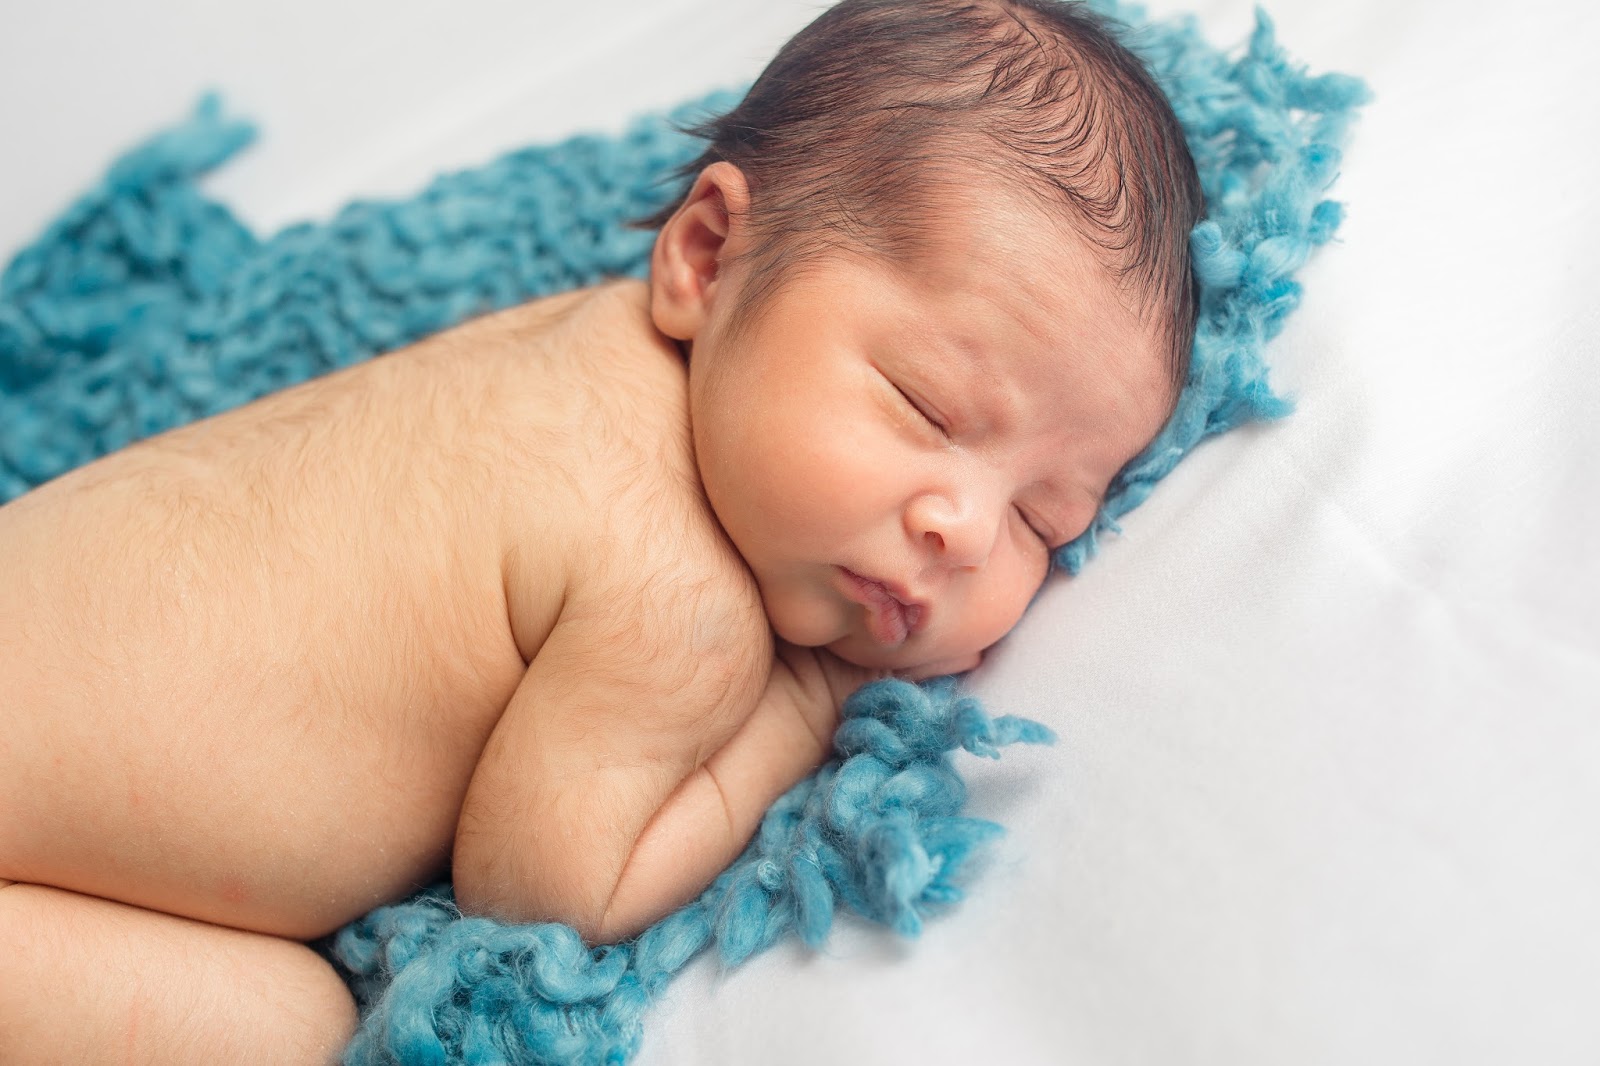 Blue-haired baby boy photoshoot - wide 7